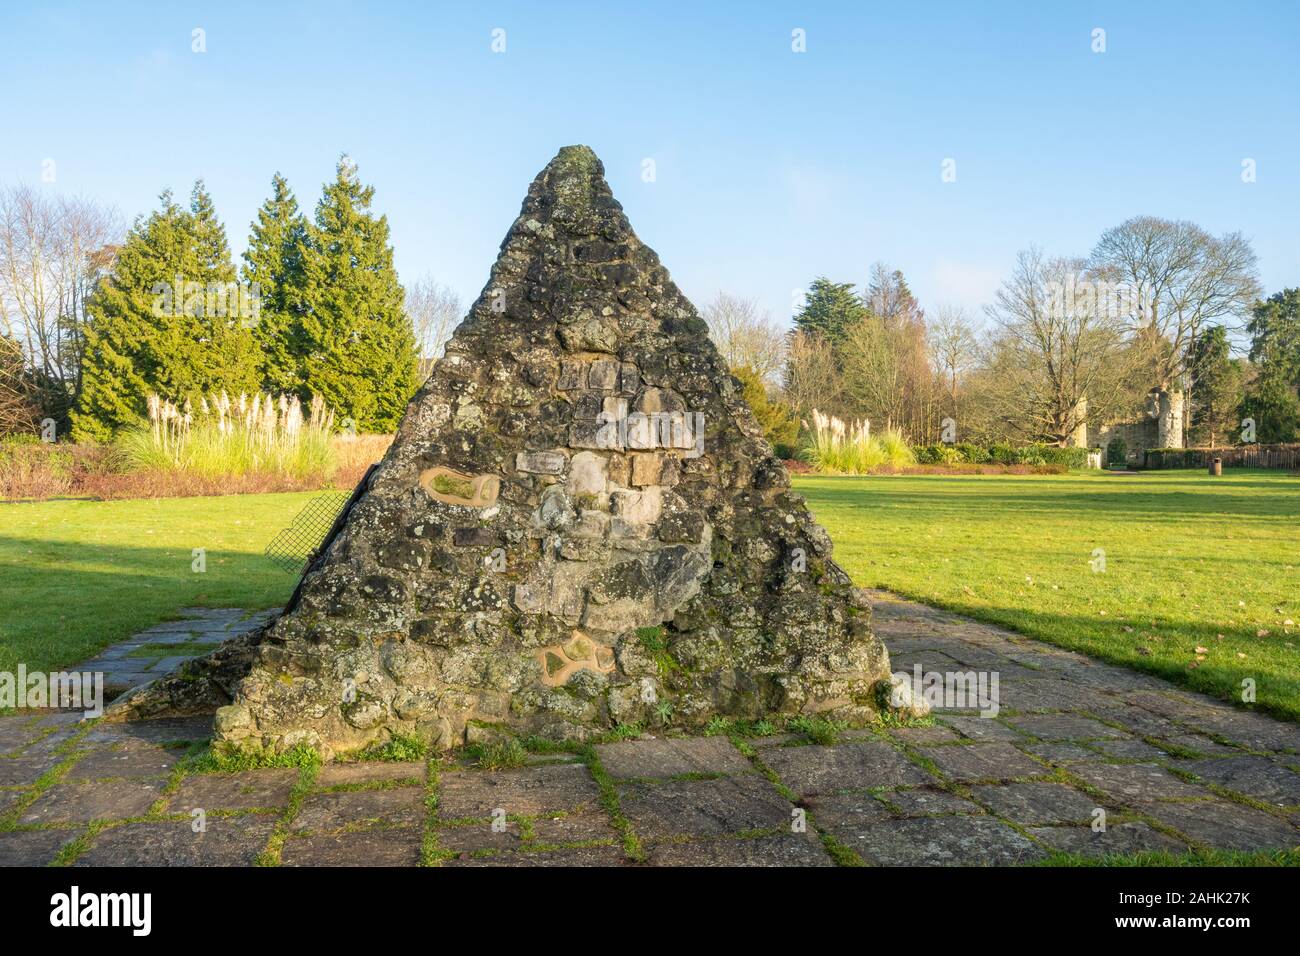 The stone pyramid in Reigate Castle Grounds, Surrey, UK, which is the top entrance to the Barons Cave, the original castle cellars. Stock Photo